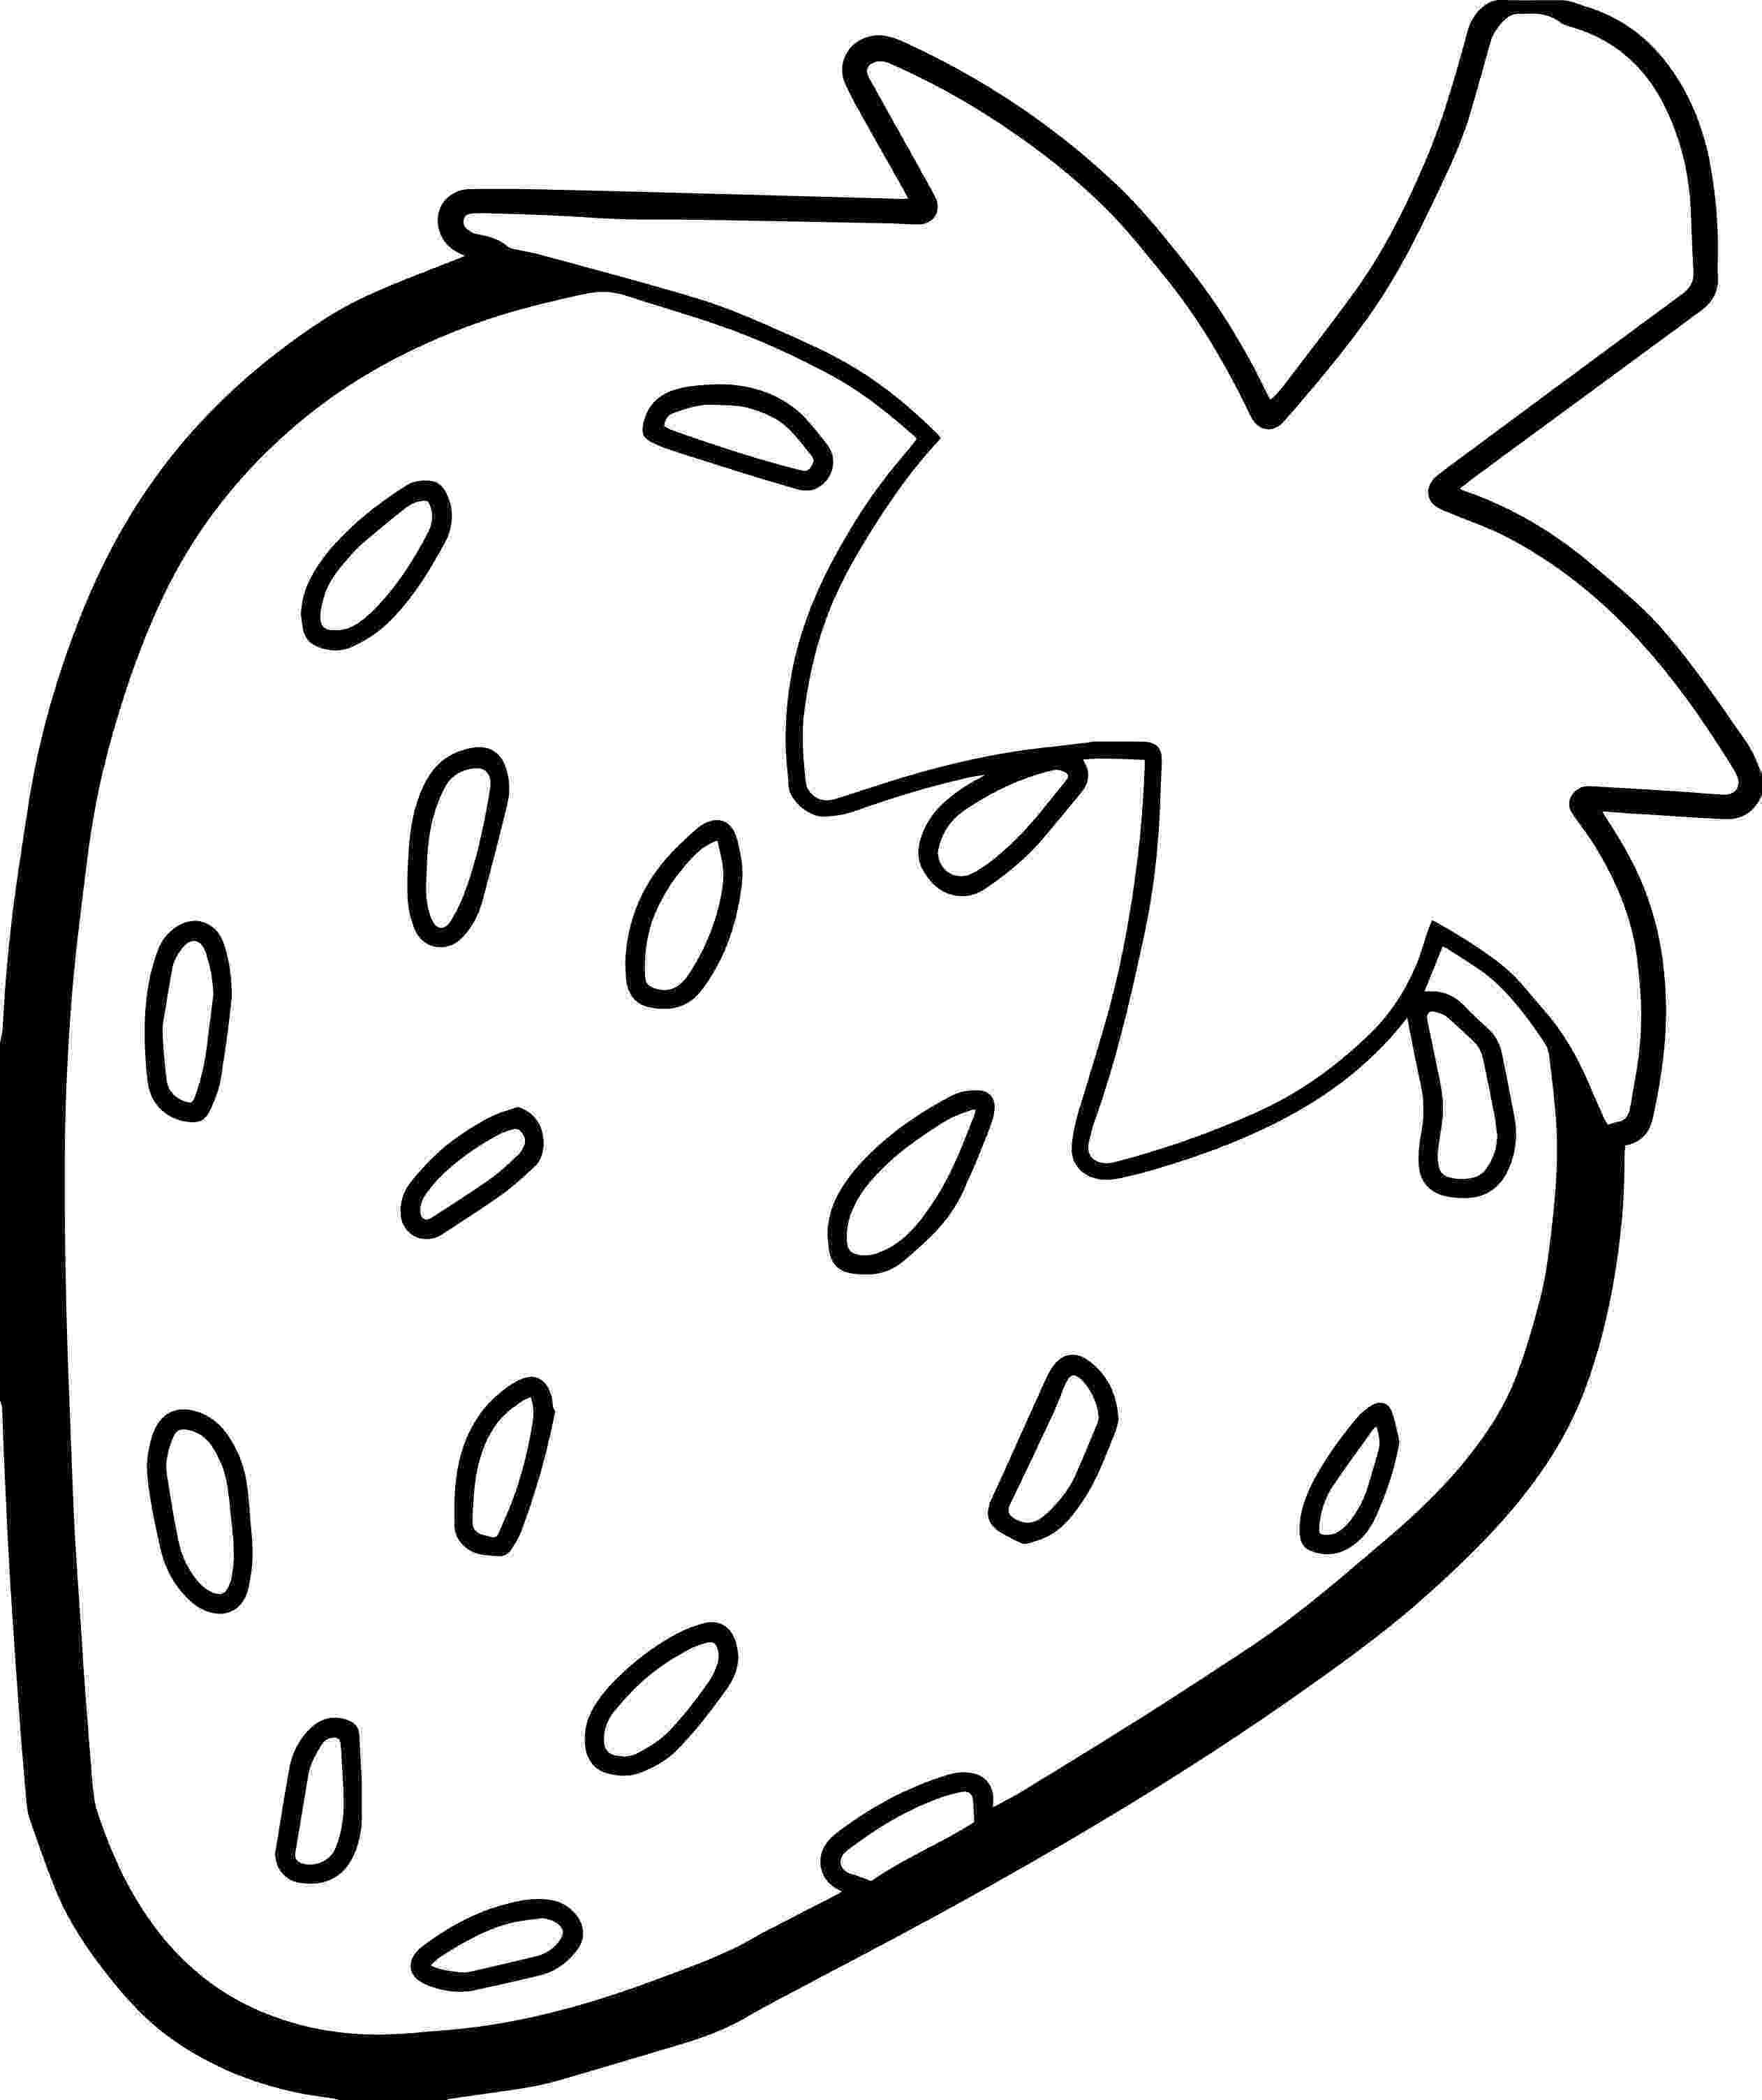 strawberry coloring pages nice strawberry bold outline coloring page fruit coloring strawberry pages 